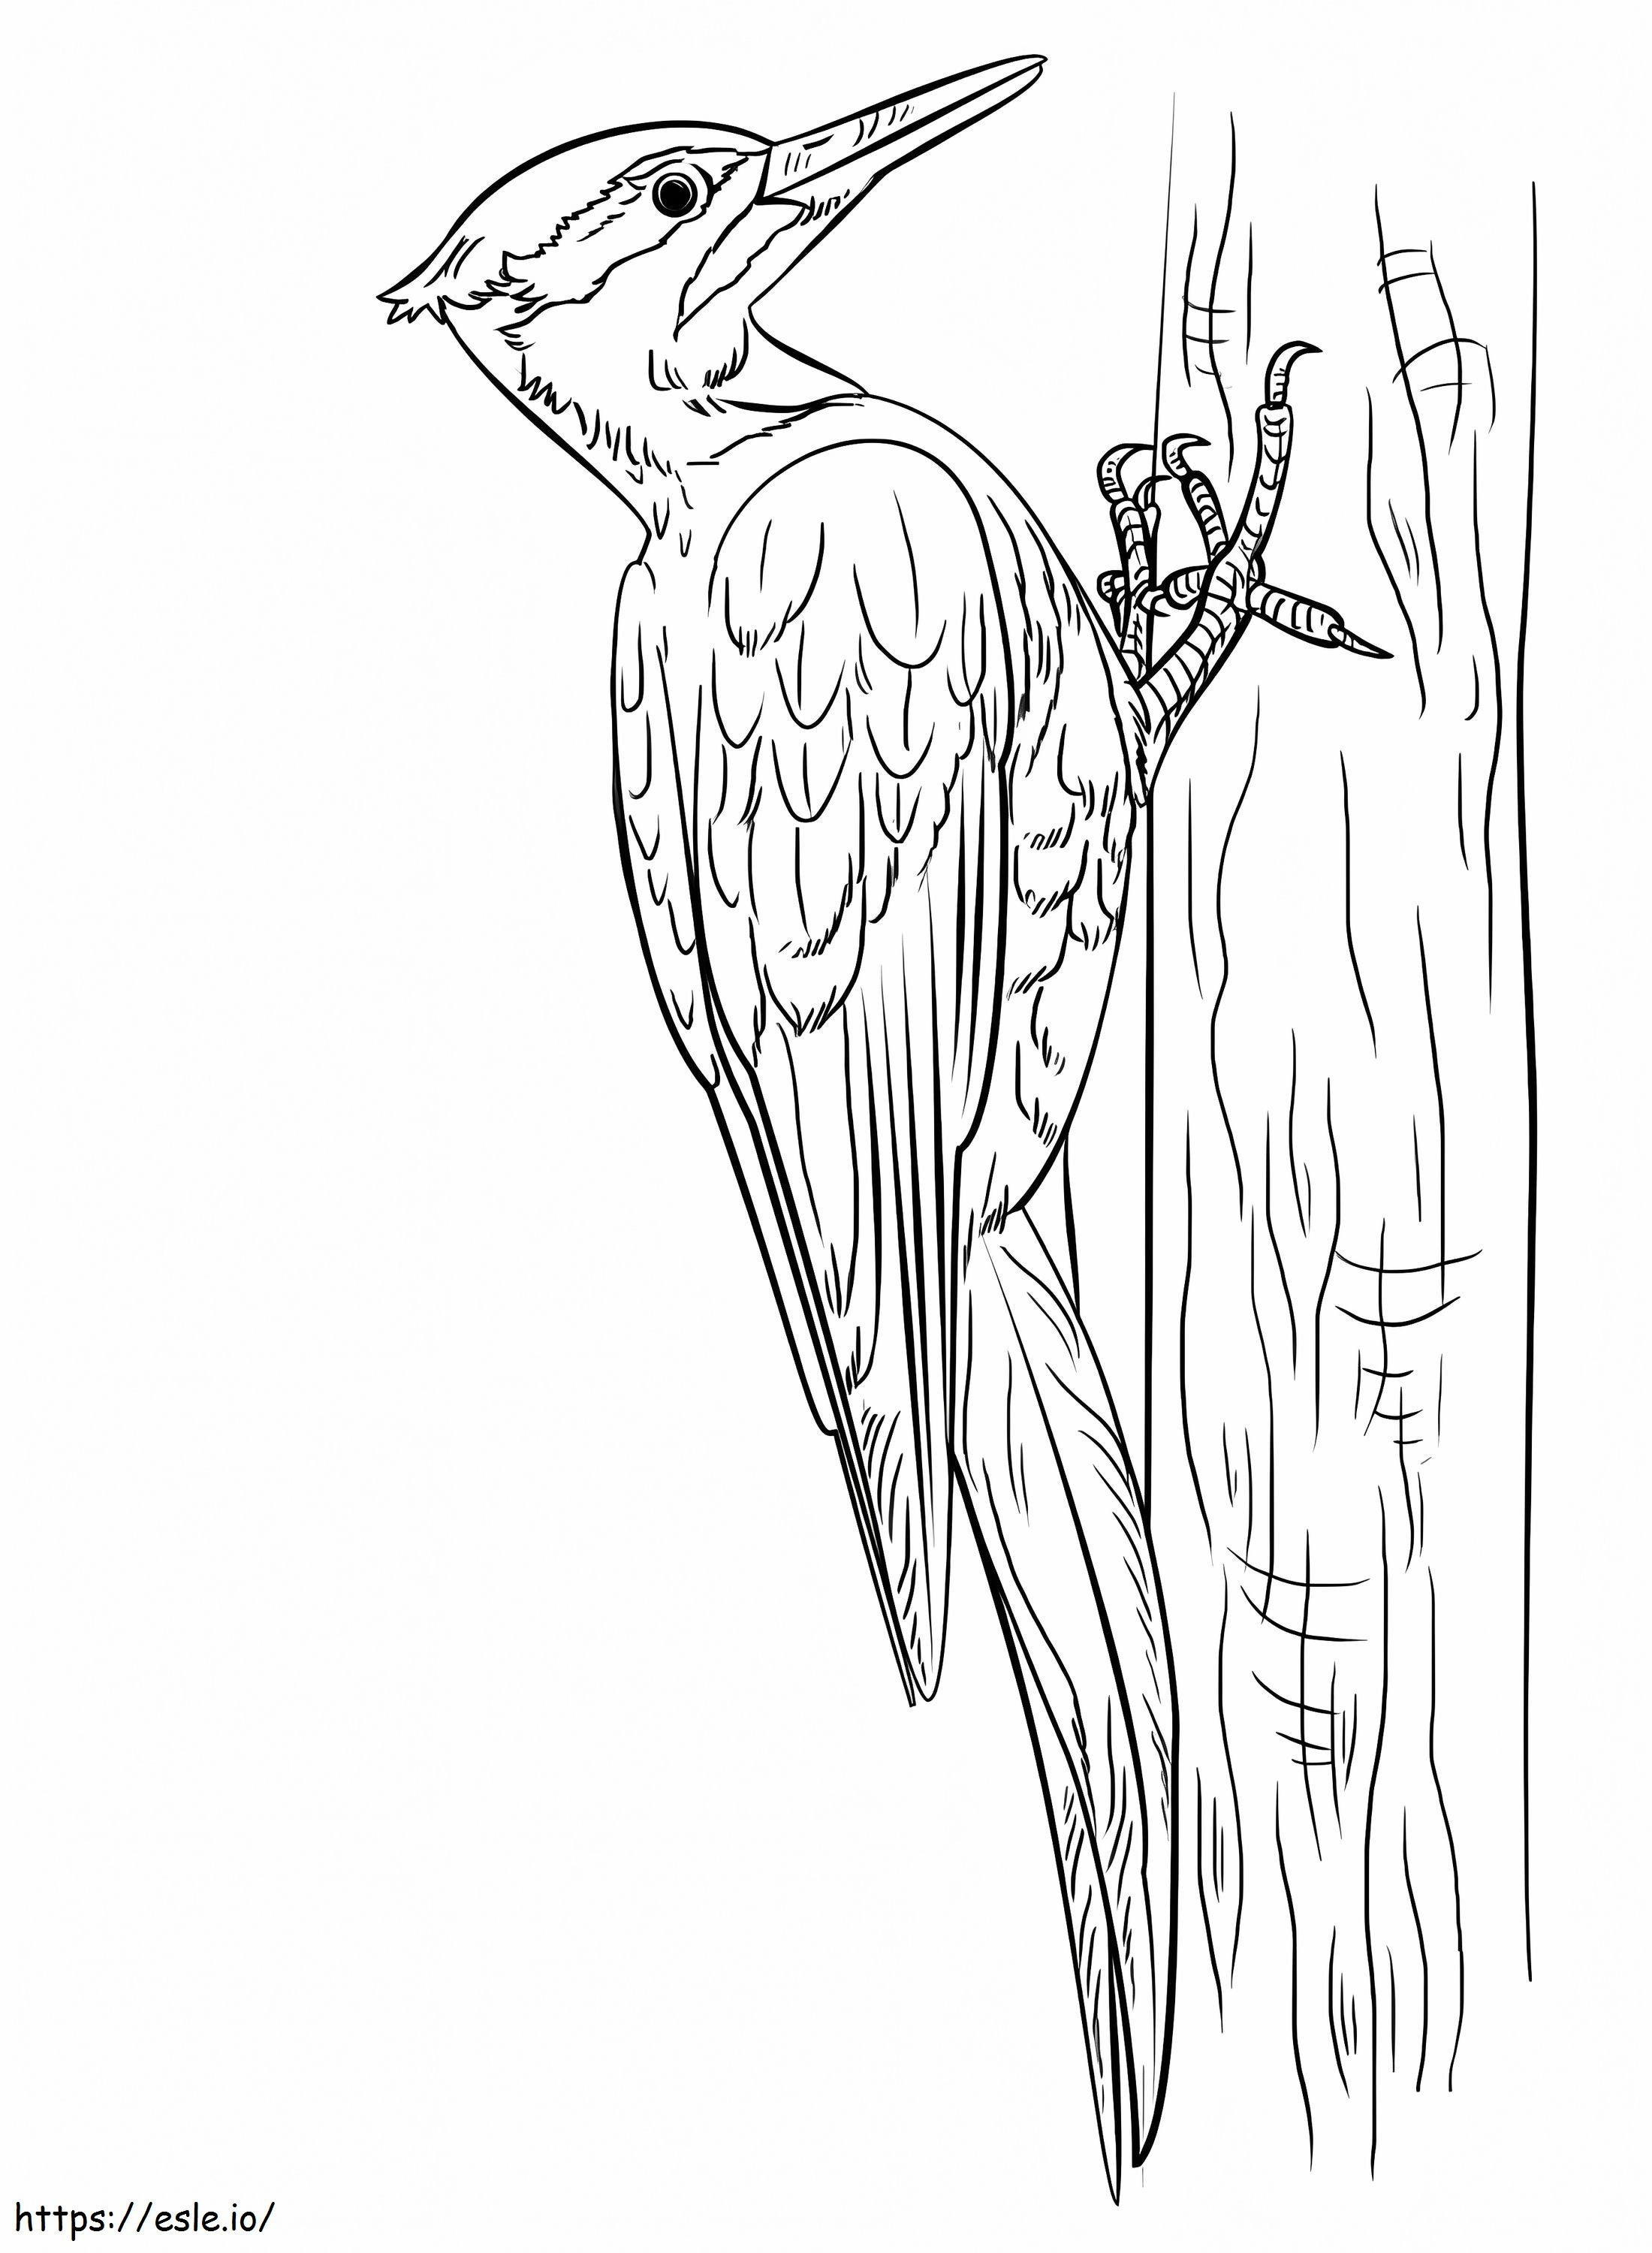 Pileated Woodpecker 1 coloring page